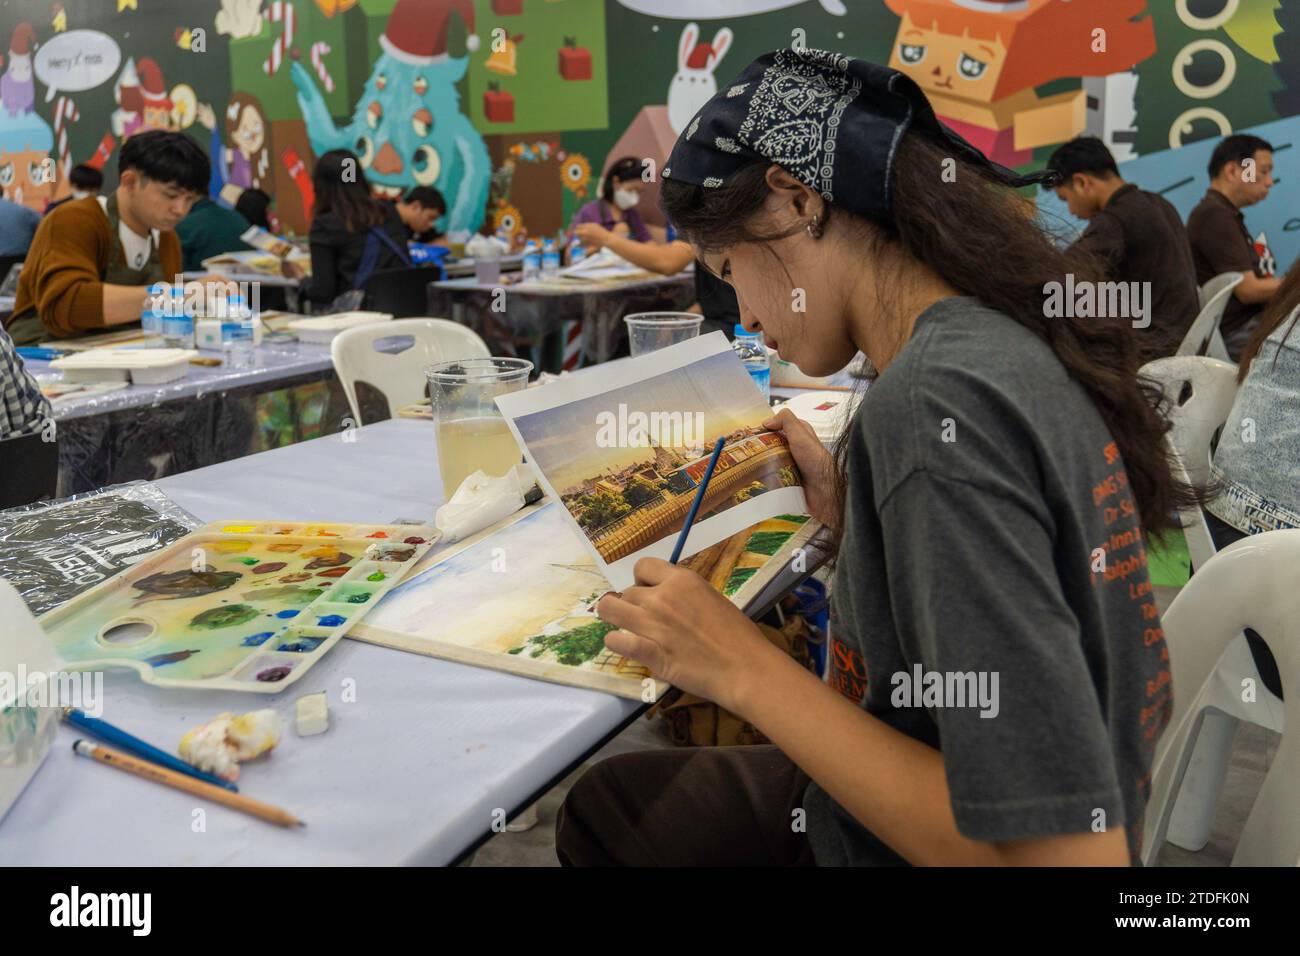 A participant is seen reproducing an image with watercolor painting, at the “BEM Art Contest' watercolor painting contest, at MRT Phahon Yothin station. The “Metro Art” at the MRT Phahon Yothin, developed by Bangkok Expressway and Metro Public (BEM), Bangkok Metro Networks Limited (BMN), and supported by the Tourism Authority of Thailand (TAT) is the new Art Space and Art Destination in the city’s heart as the MRT Phahon Yothin station connects to all areas of Bangkok, where visitors can learn arts in various fields, shop and sell works of art. (Photo by Nathalie Jamois / SOPA Images/Sipa USA) Stock Photo